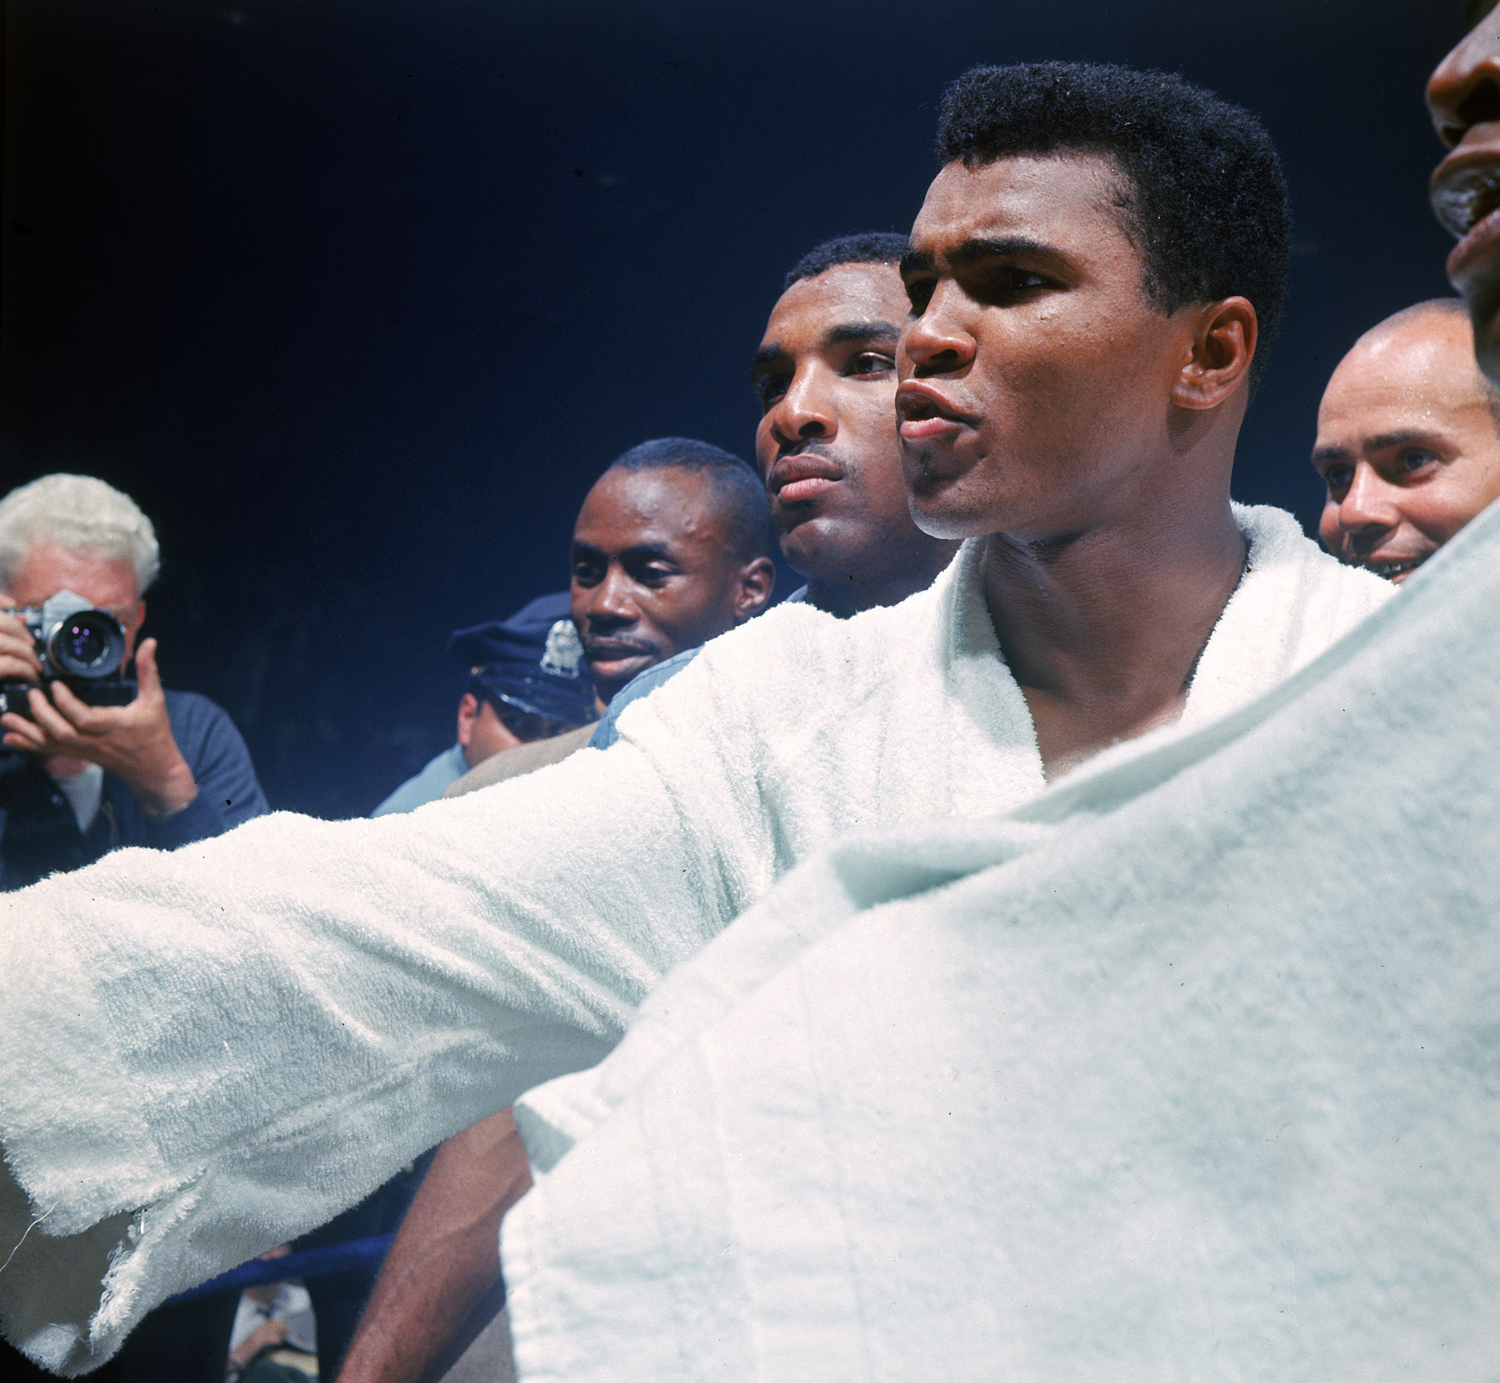 Muhammad Ali gestures before his fight with Sonny Liston, Lewiston, Maine, May 25, 1965.